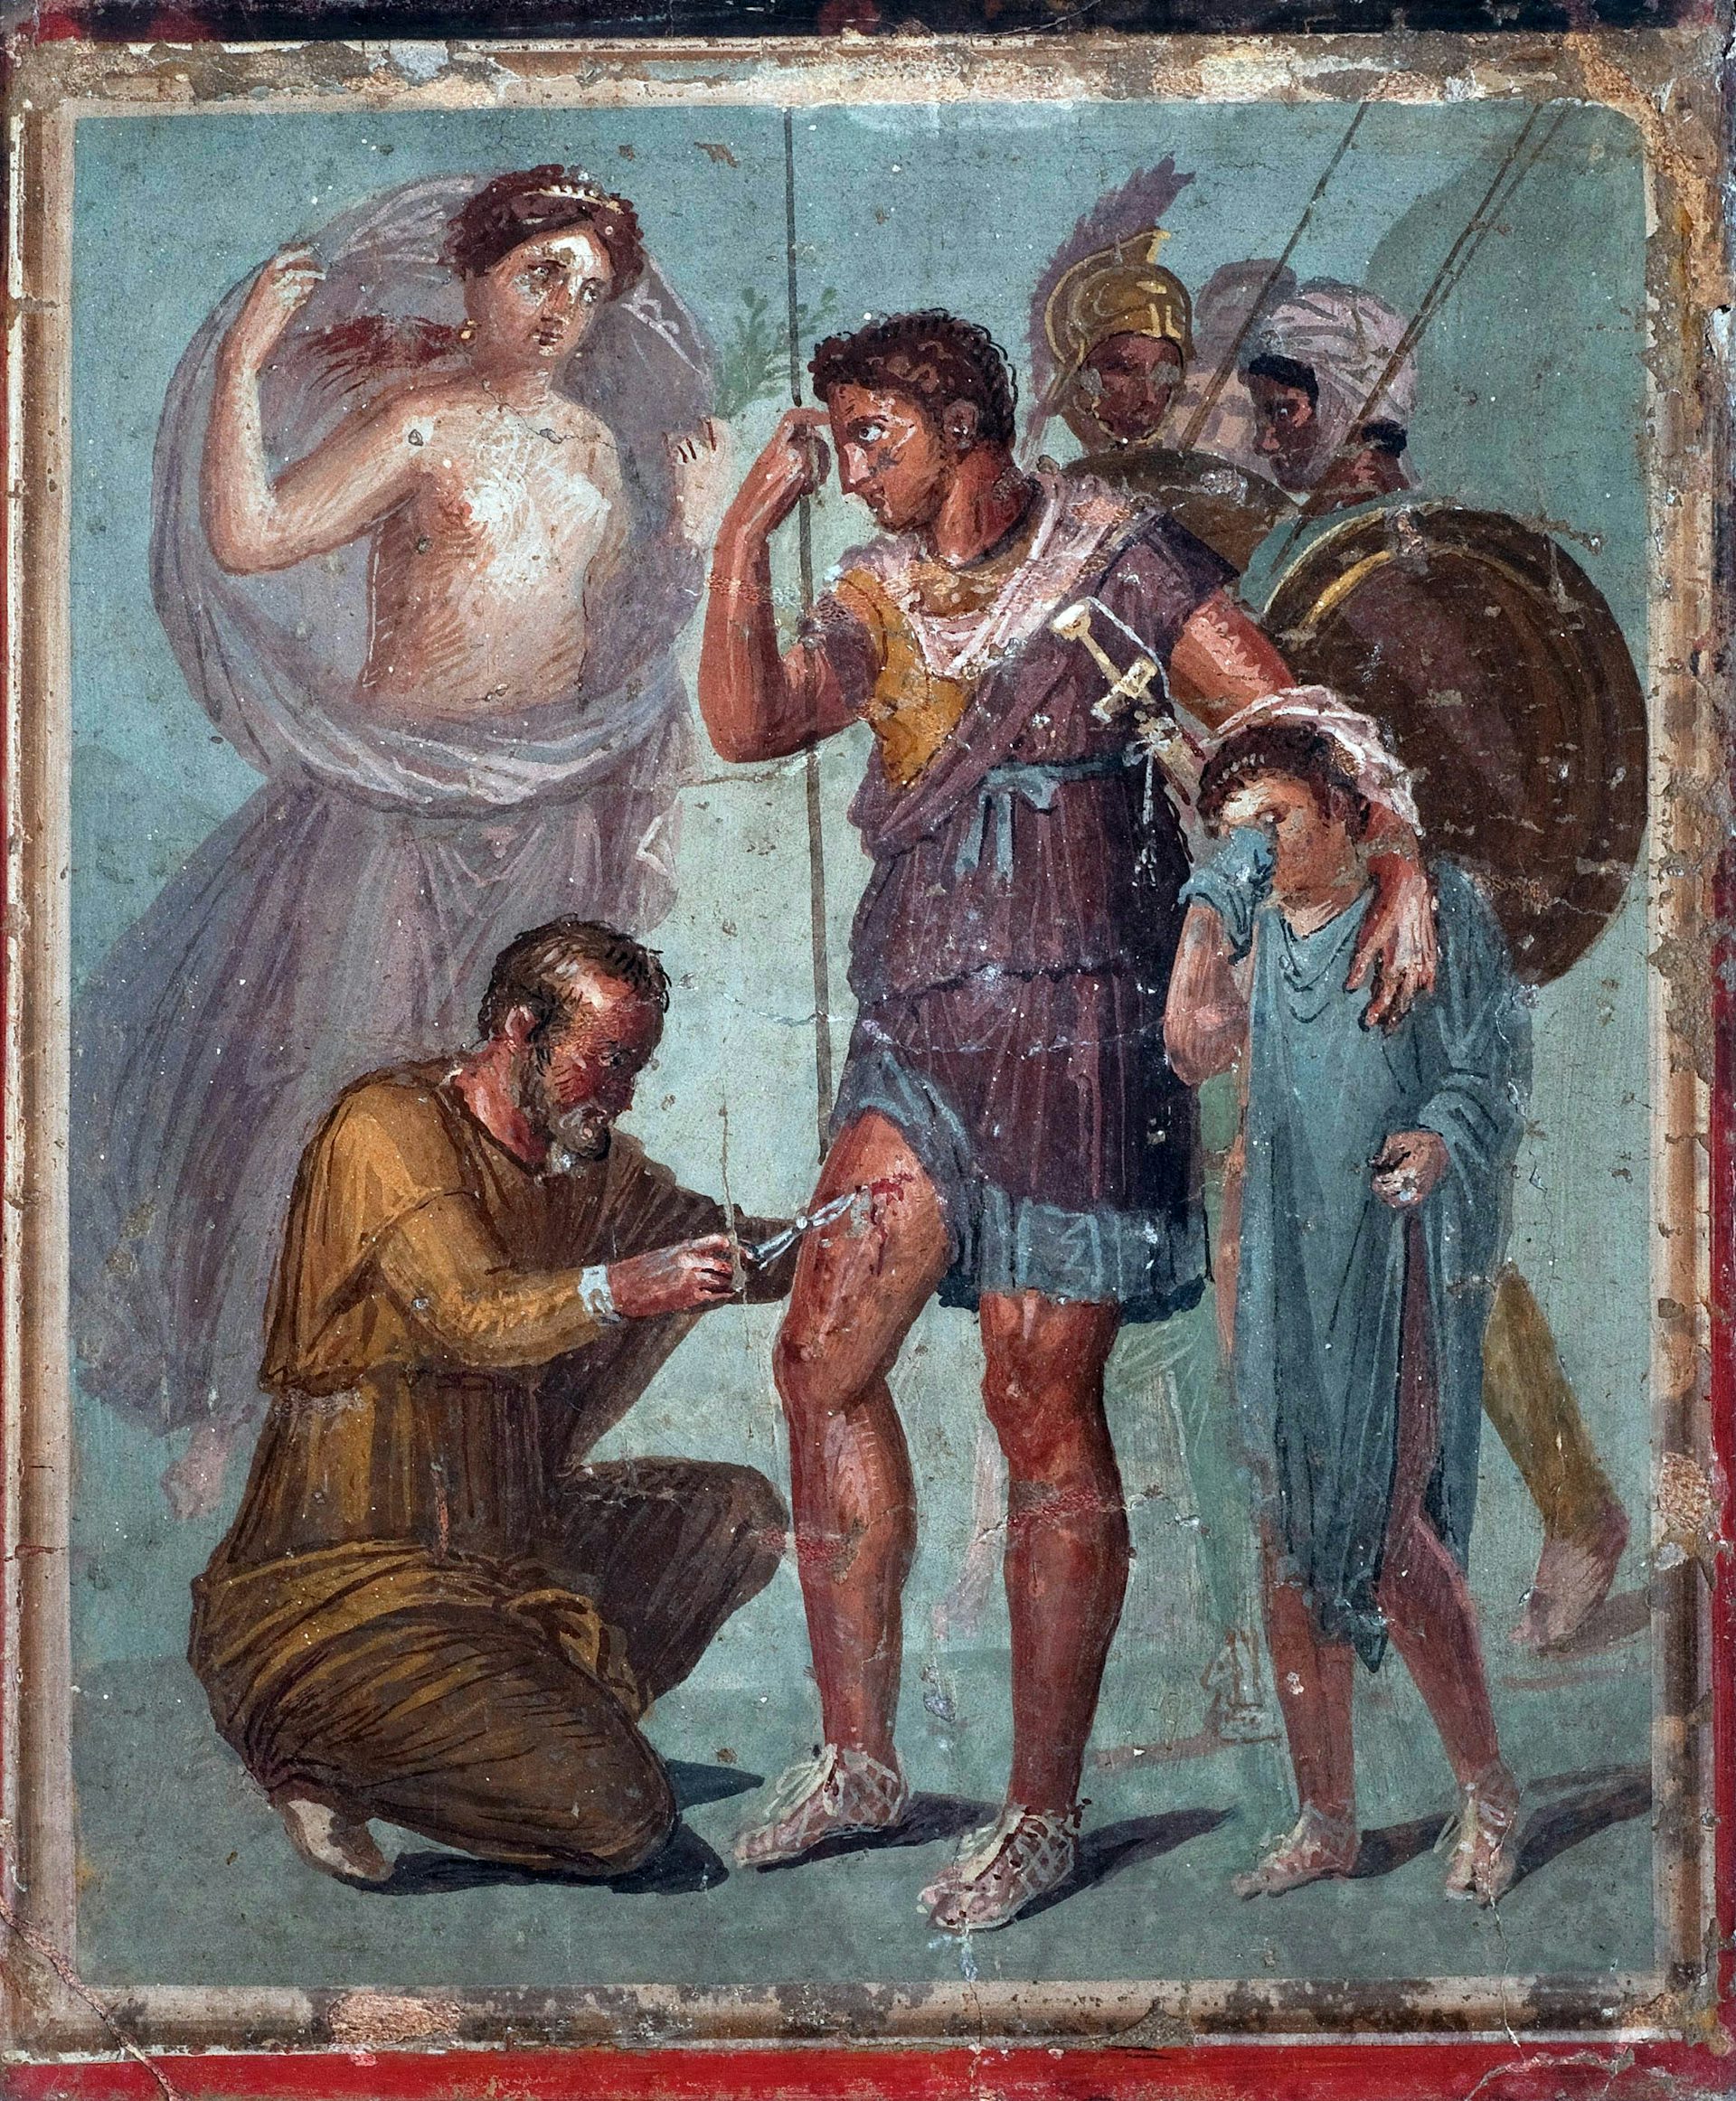 Fresco of Iapyx removing the arrowhead from the thigh of Aeneas